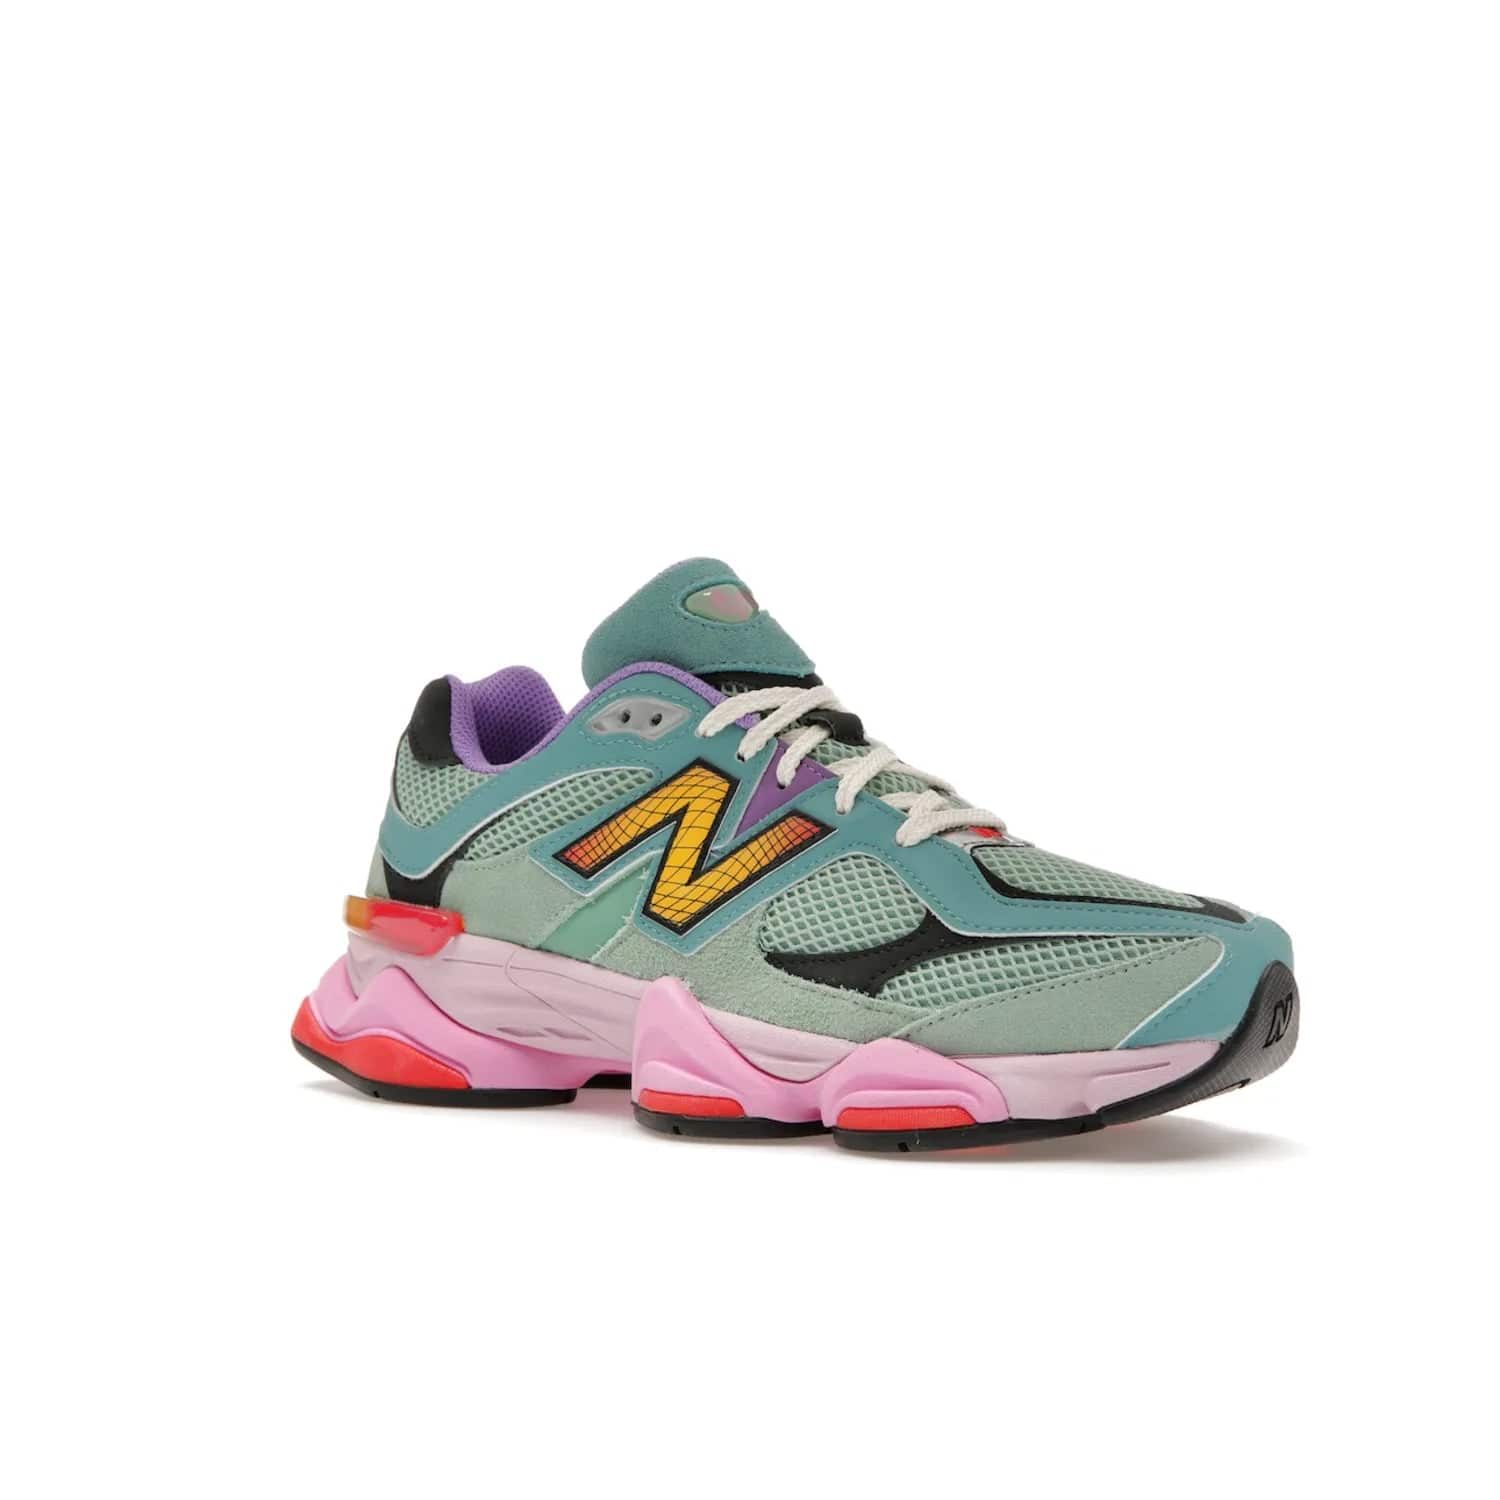 New Balance 9060 Warped Multi-Color - Image 5 - Only at www.BallersClubKickz.com - Enhance your style with the new New Balance 9060 Warped Multi-Colour! Suede overlays, mesh base layer and ABZORB midsole provide comfortable cushioning, while the colourful design ticks all the latest trends. Nylon laces offer an adjustable fit for maximum convenience. Debuting on March 31, 2023 - a must-have addition to your sneaker collection.